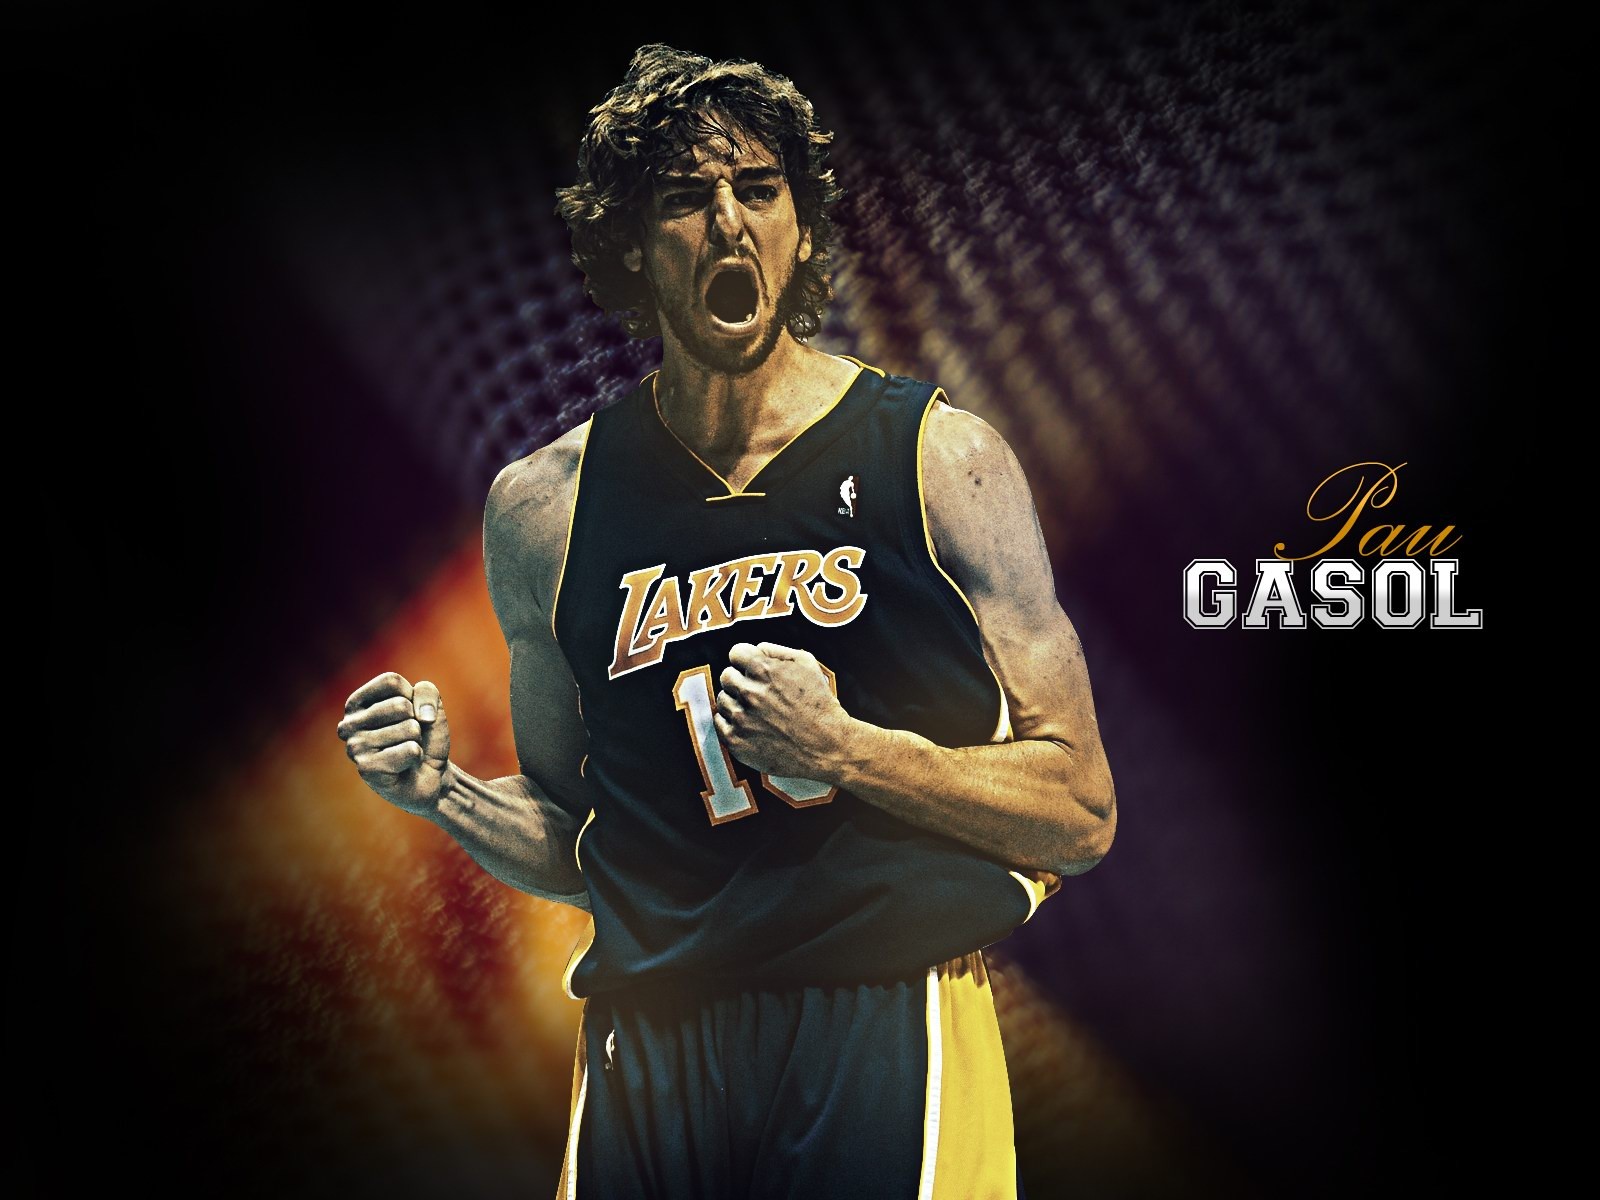 Los Angeles Lakers Wallpaper Oficial #20 - 1600x1200